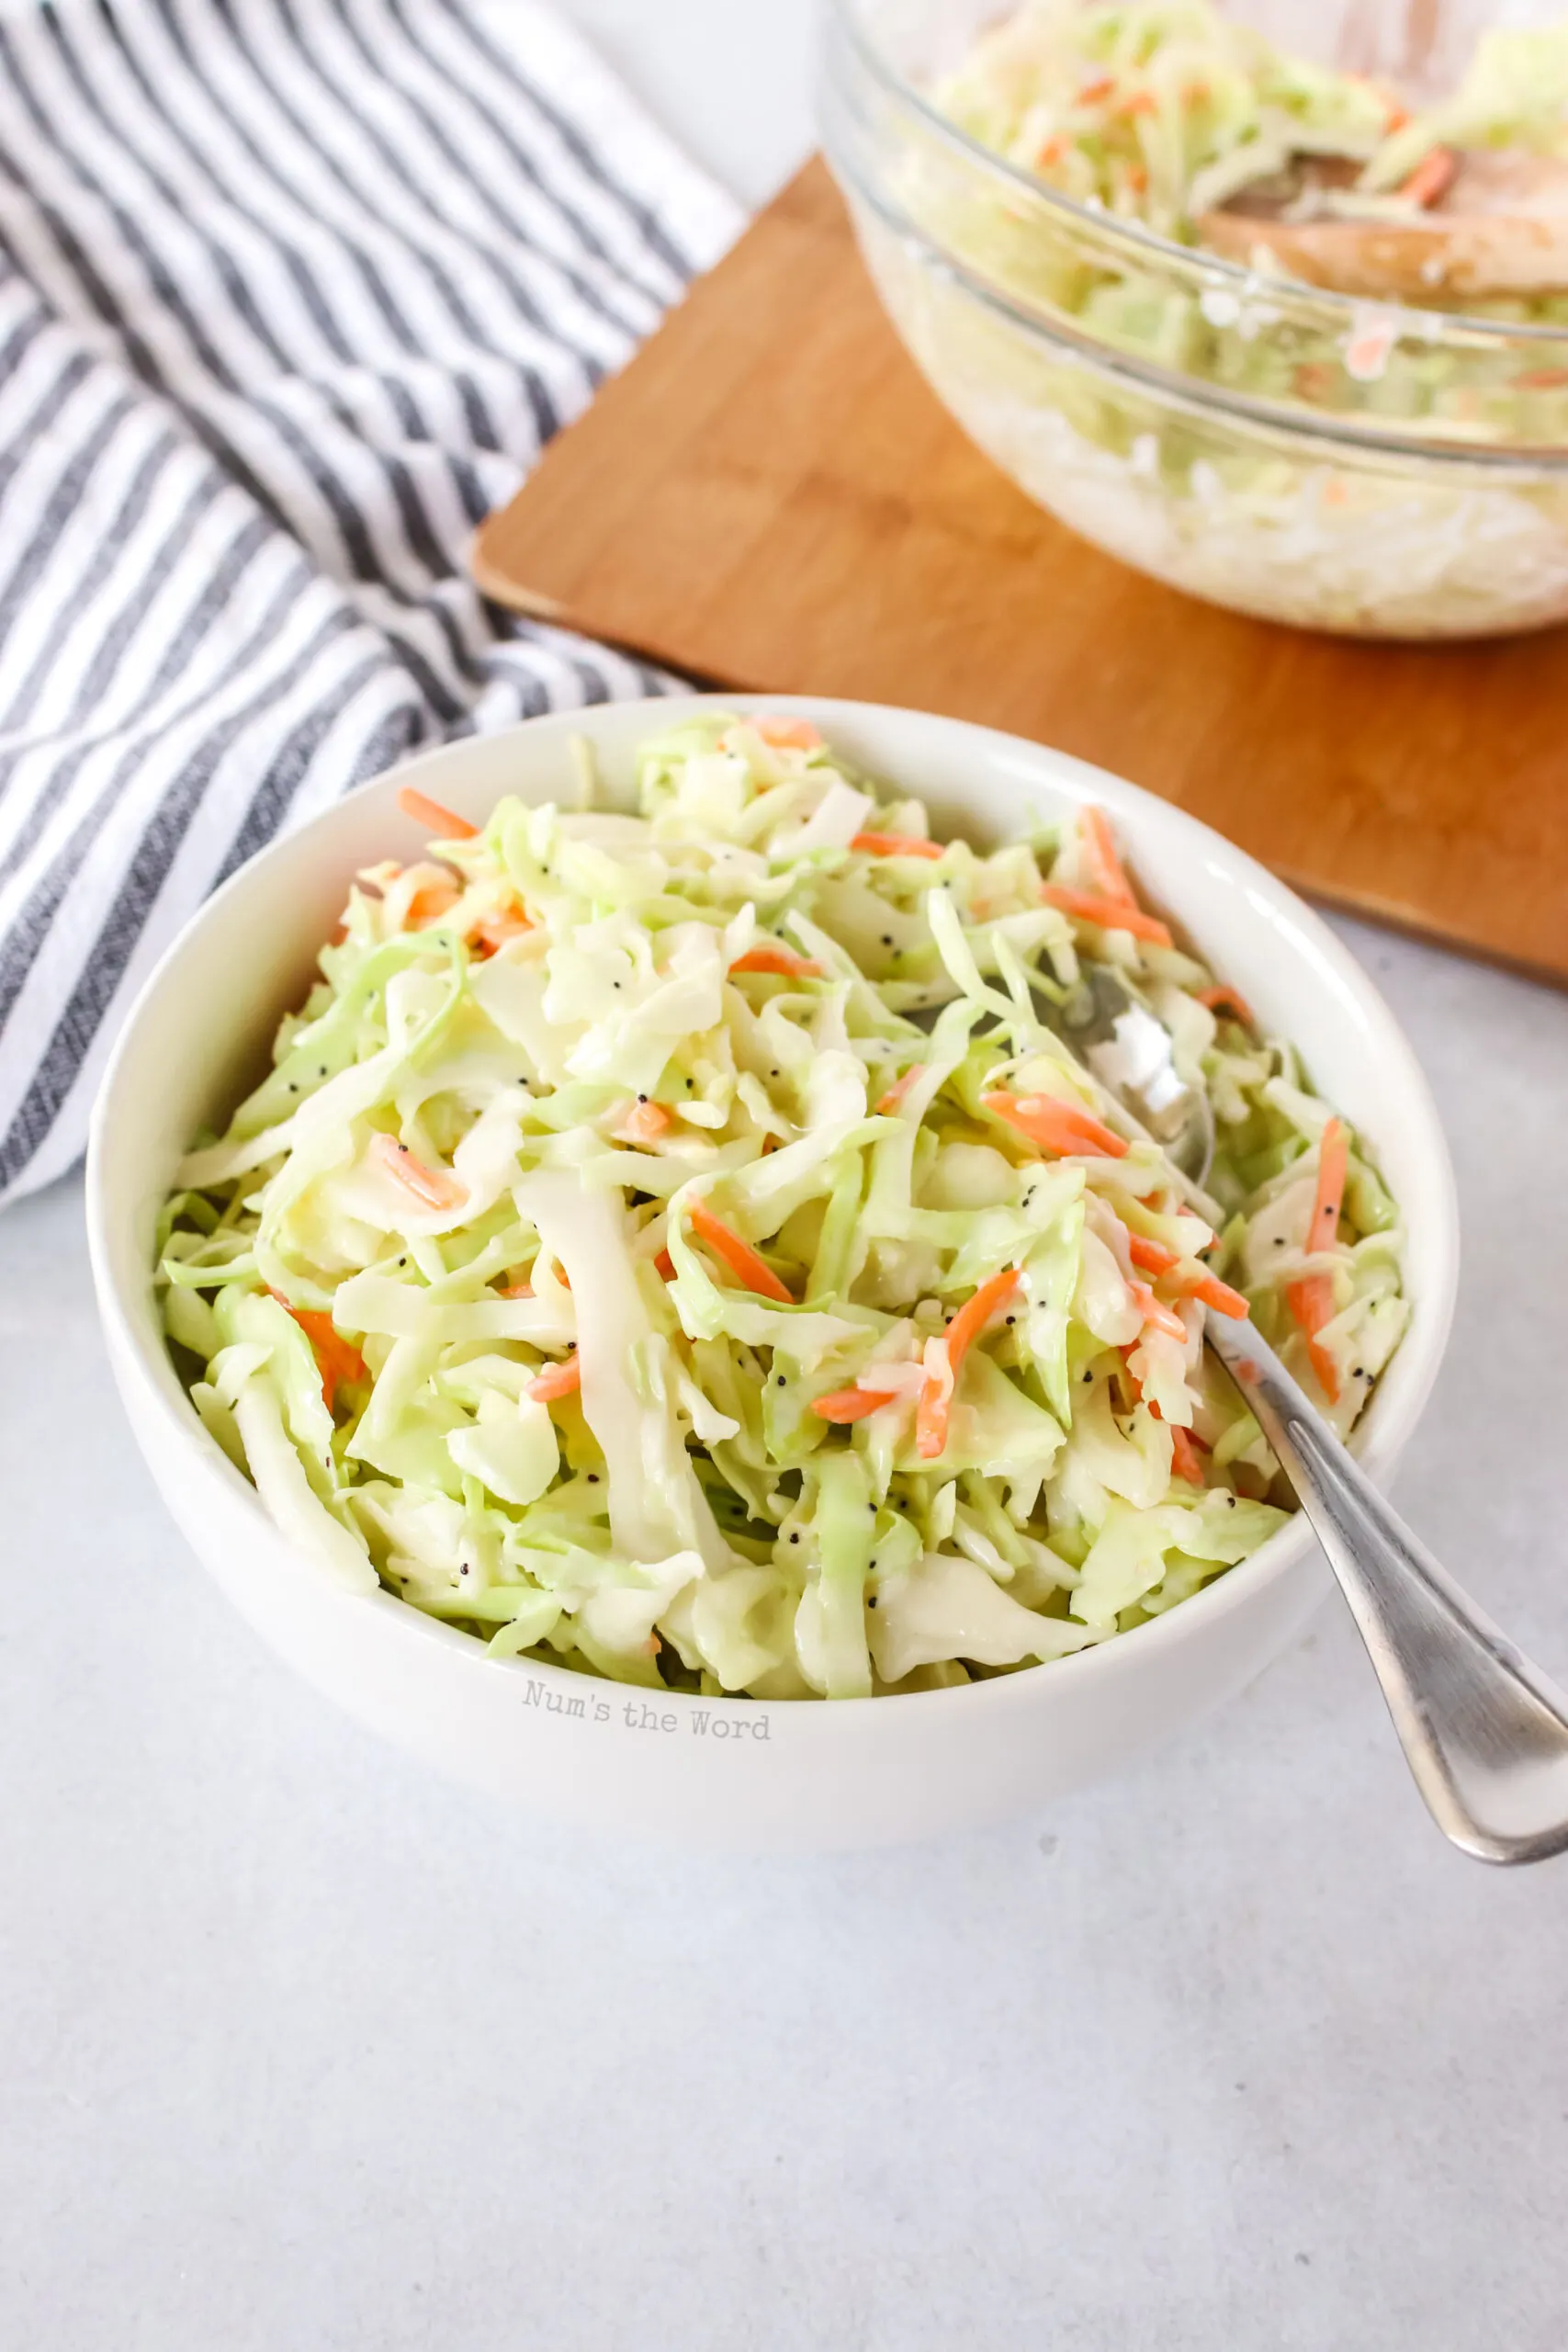 coleslaw in a bowl ready to eat with a spoon